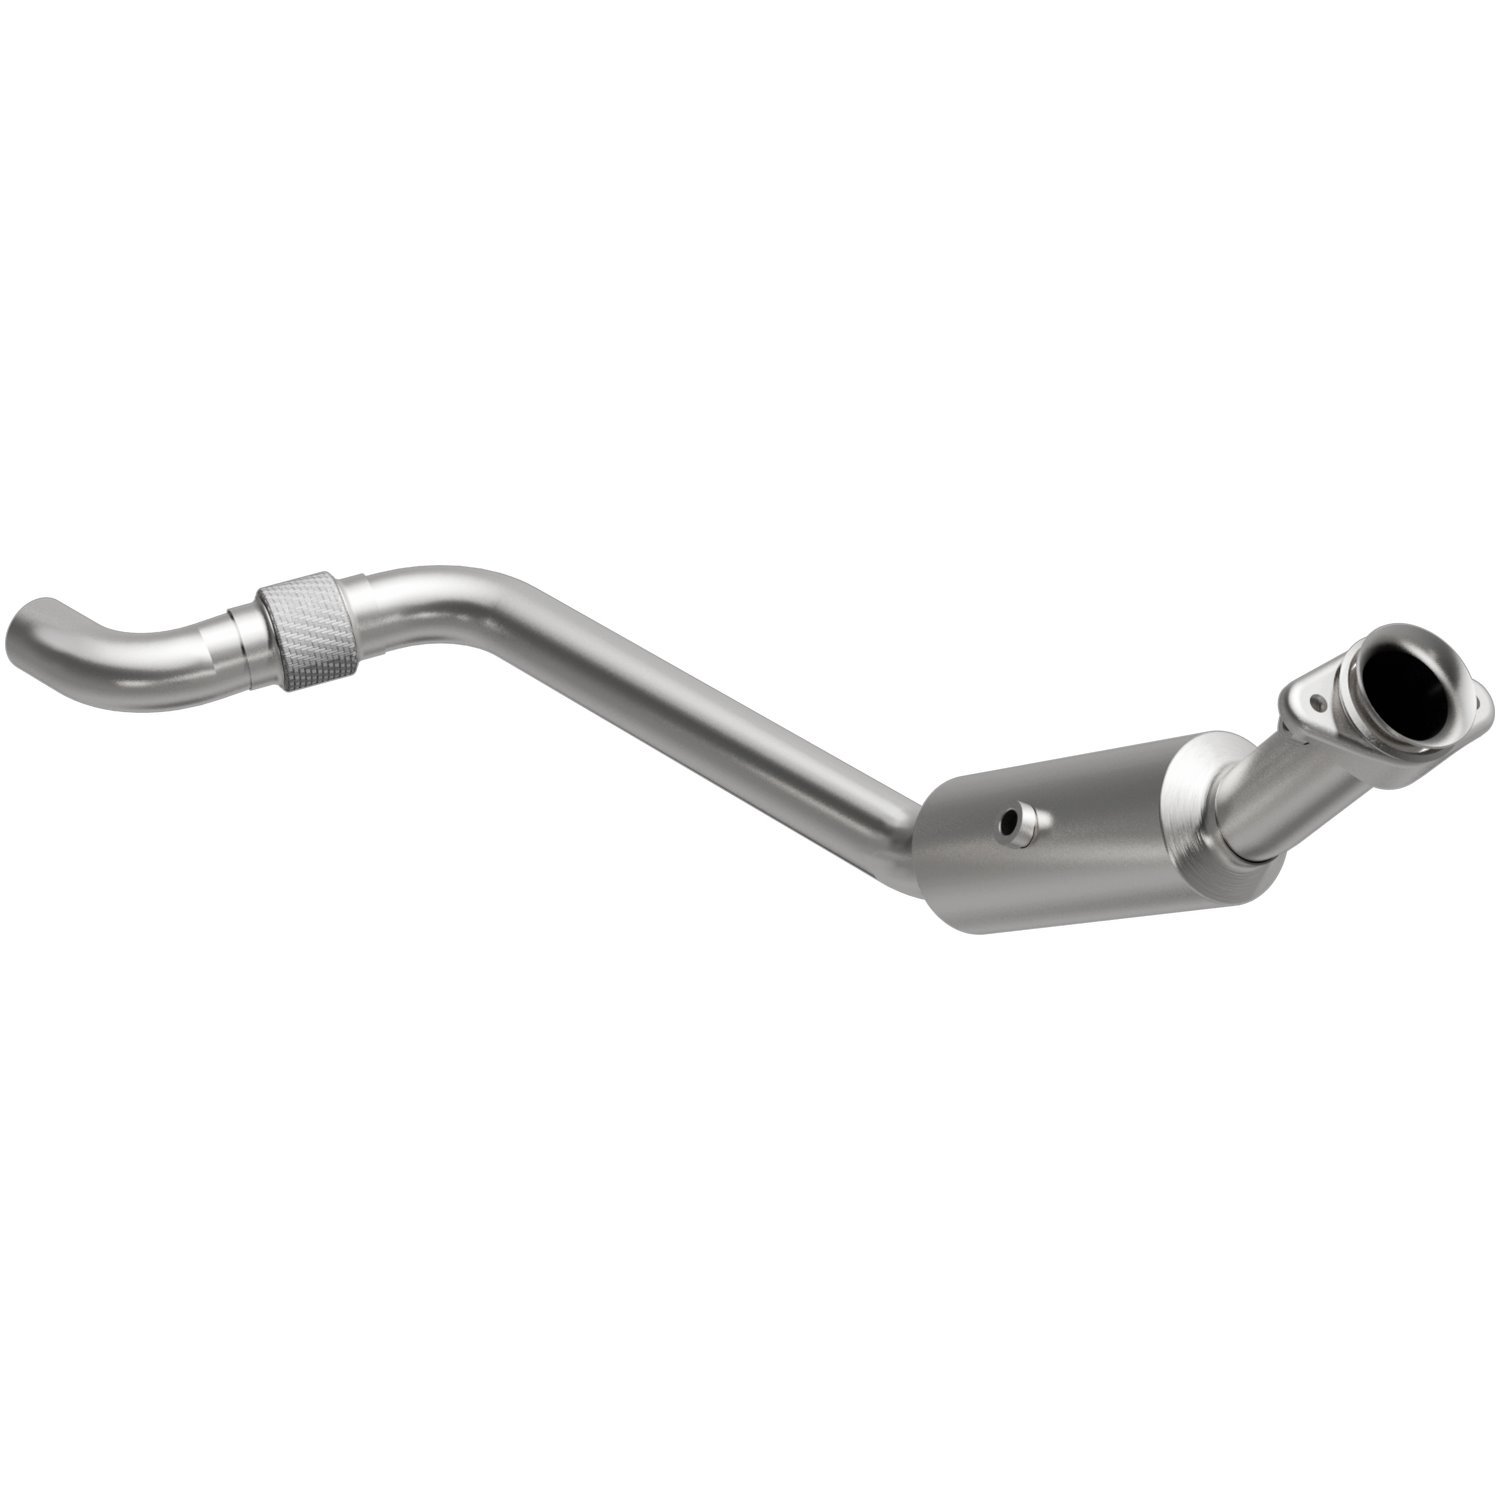 2015-2017 Ford Mustang OEM Grade Federal / EPA Compliant Direct-Fit Catalytic Converter 21-473